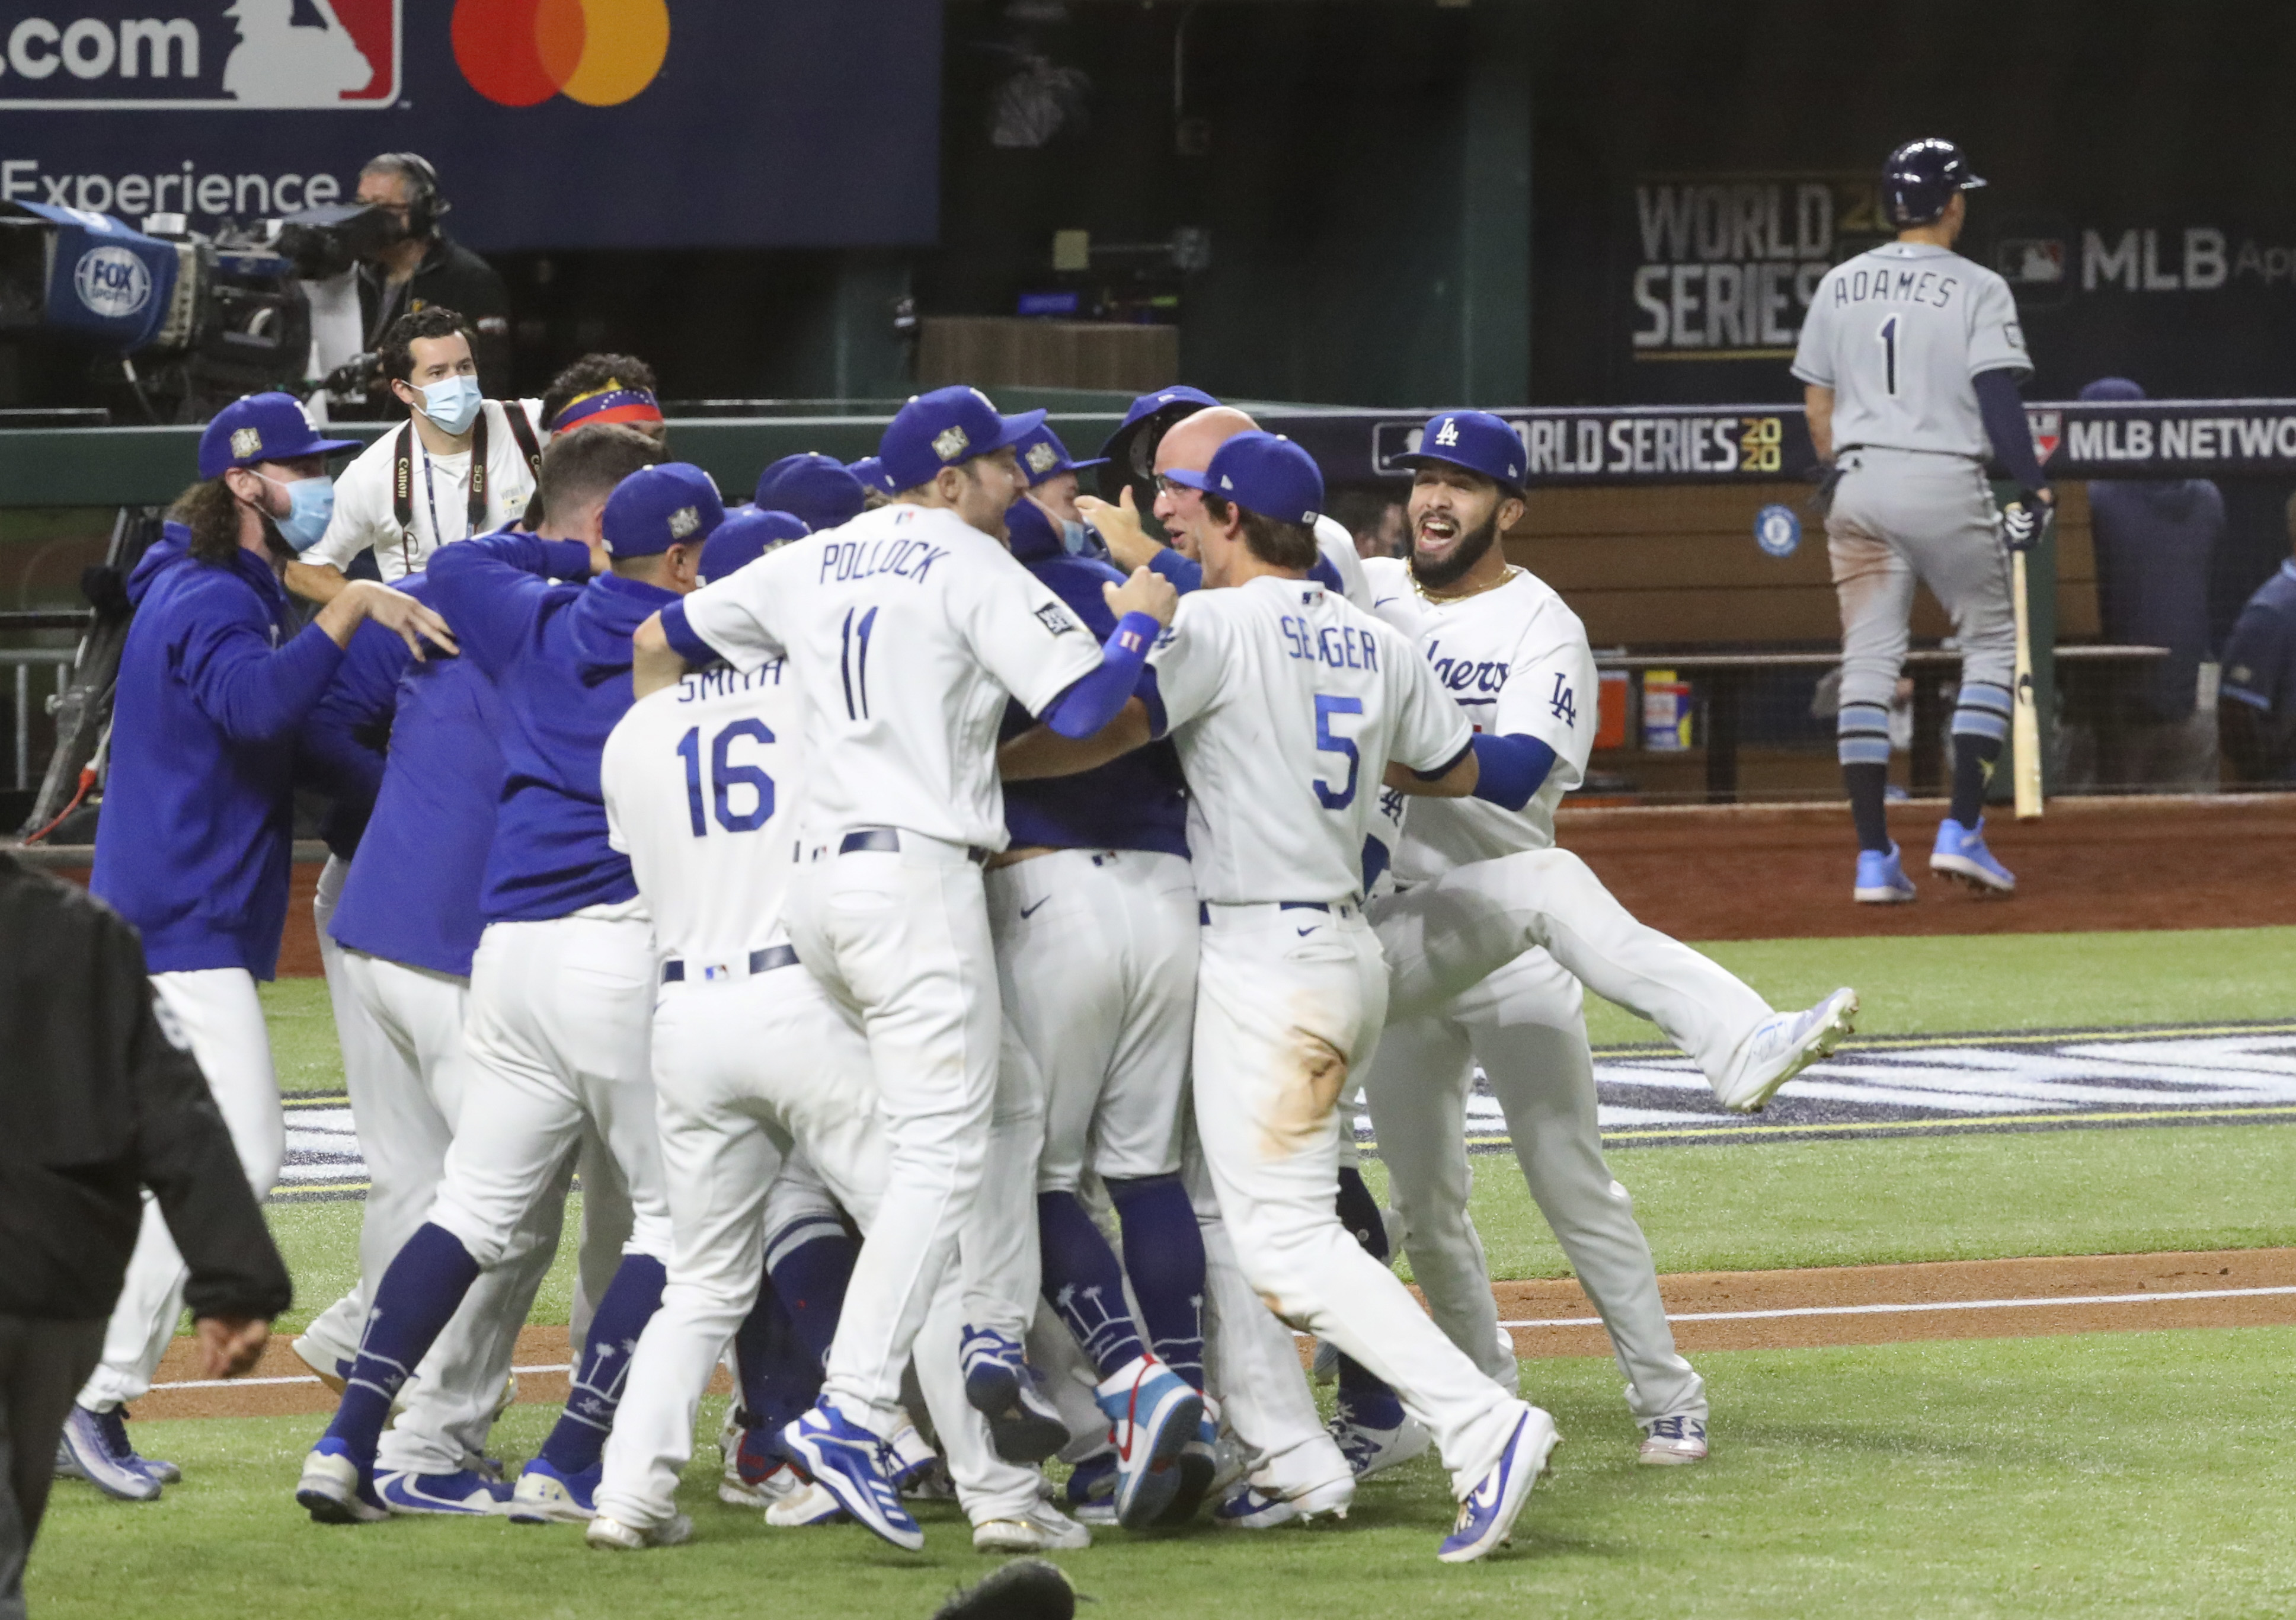 Rays' World Series Game 6 debacle: When computers ruled, and baseball lost